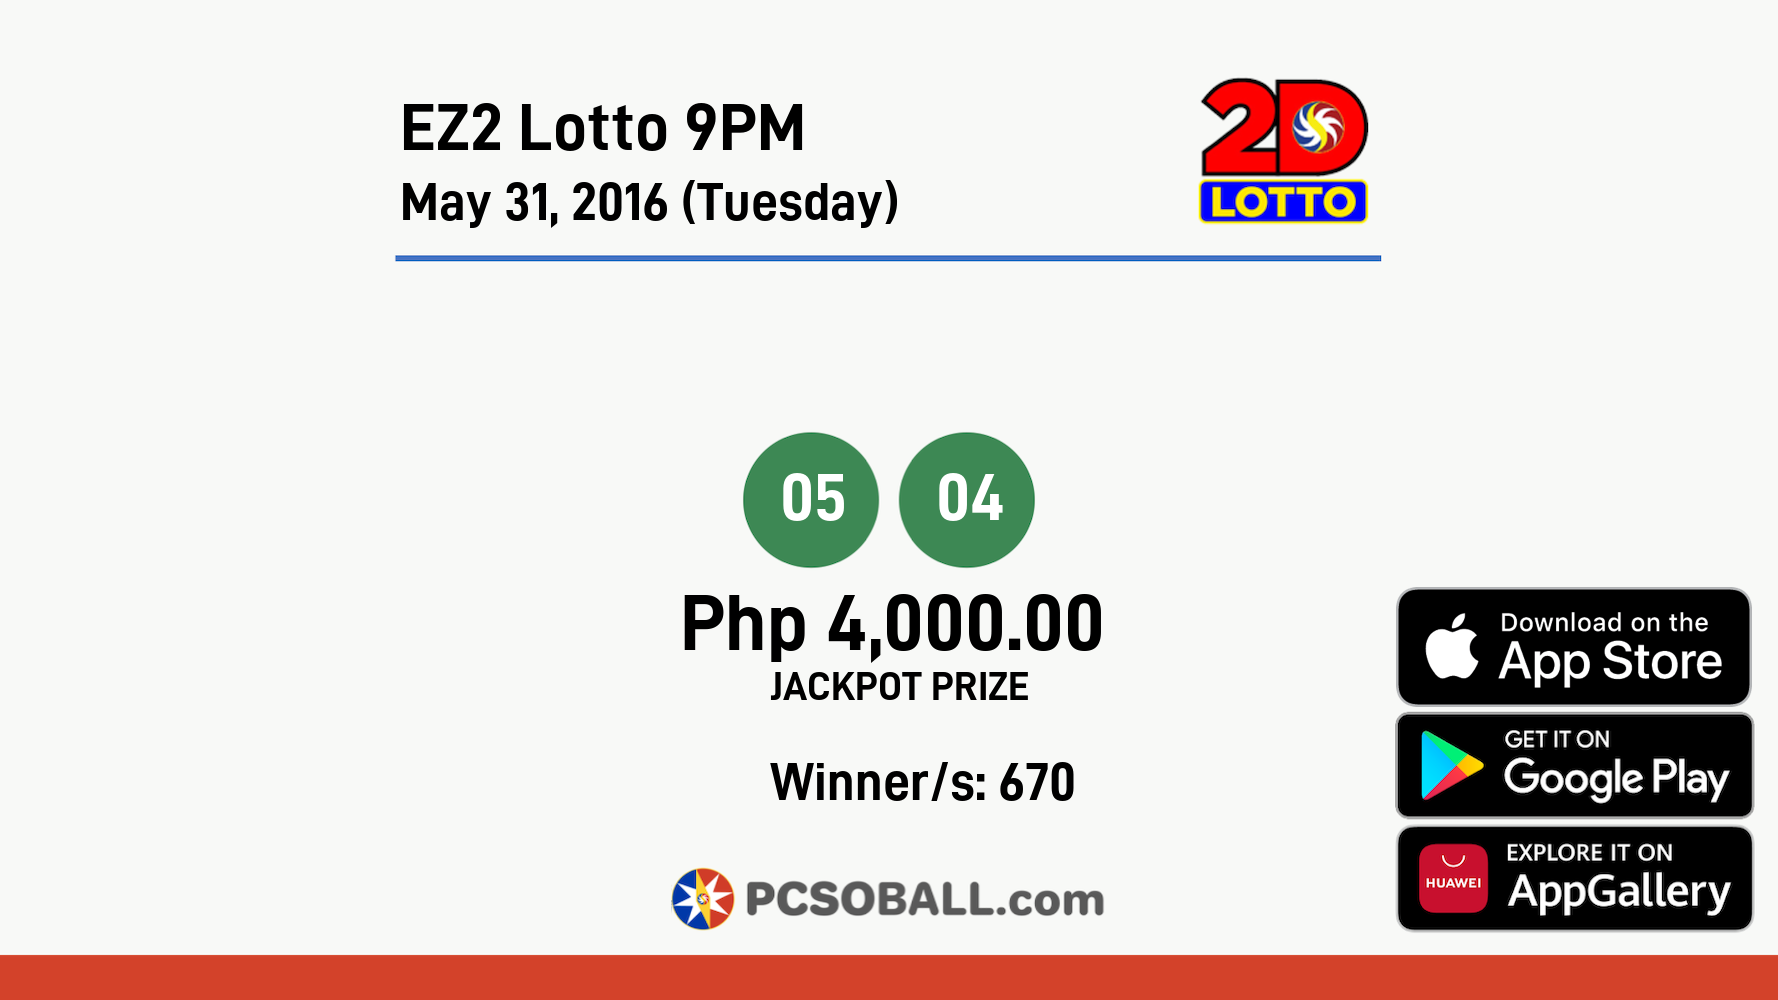 EZ2 Lotto 9PM May 31, 2016 (Tuesday) Result